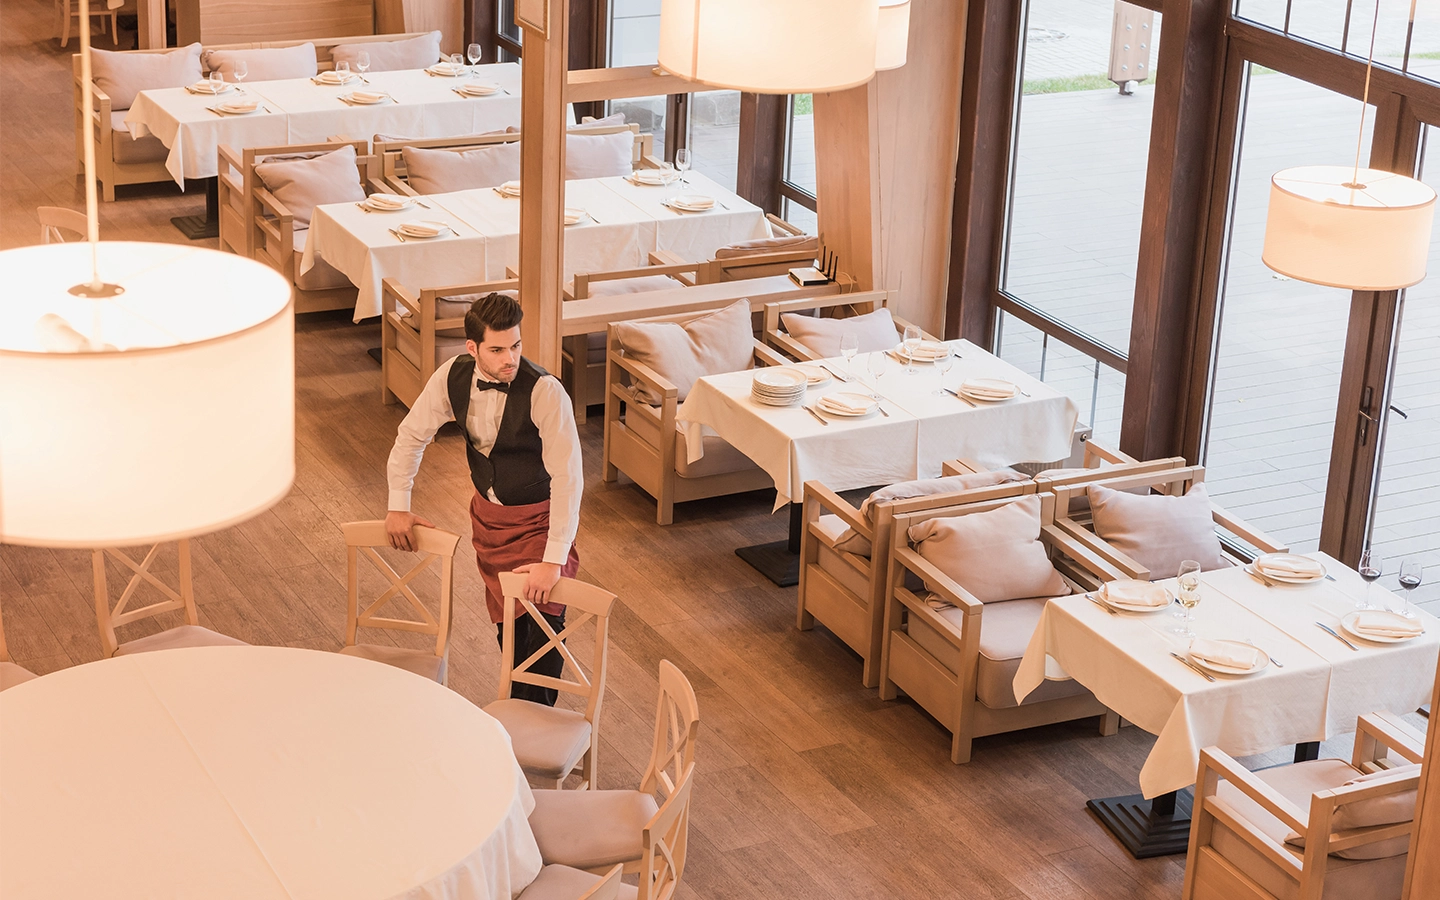 Hero image of a male waiter at a restaurant preparing a table before service.